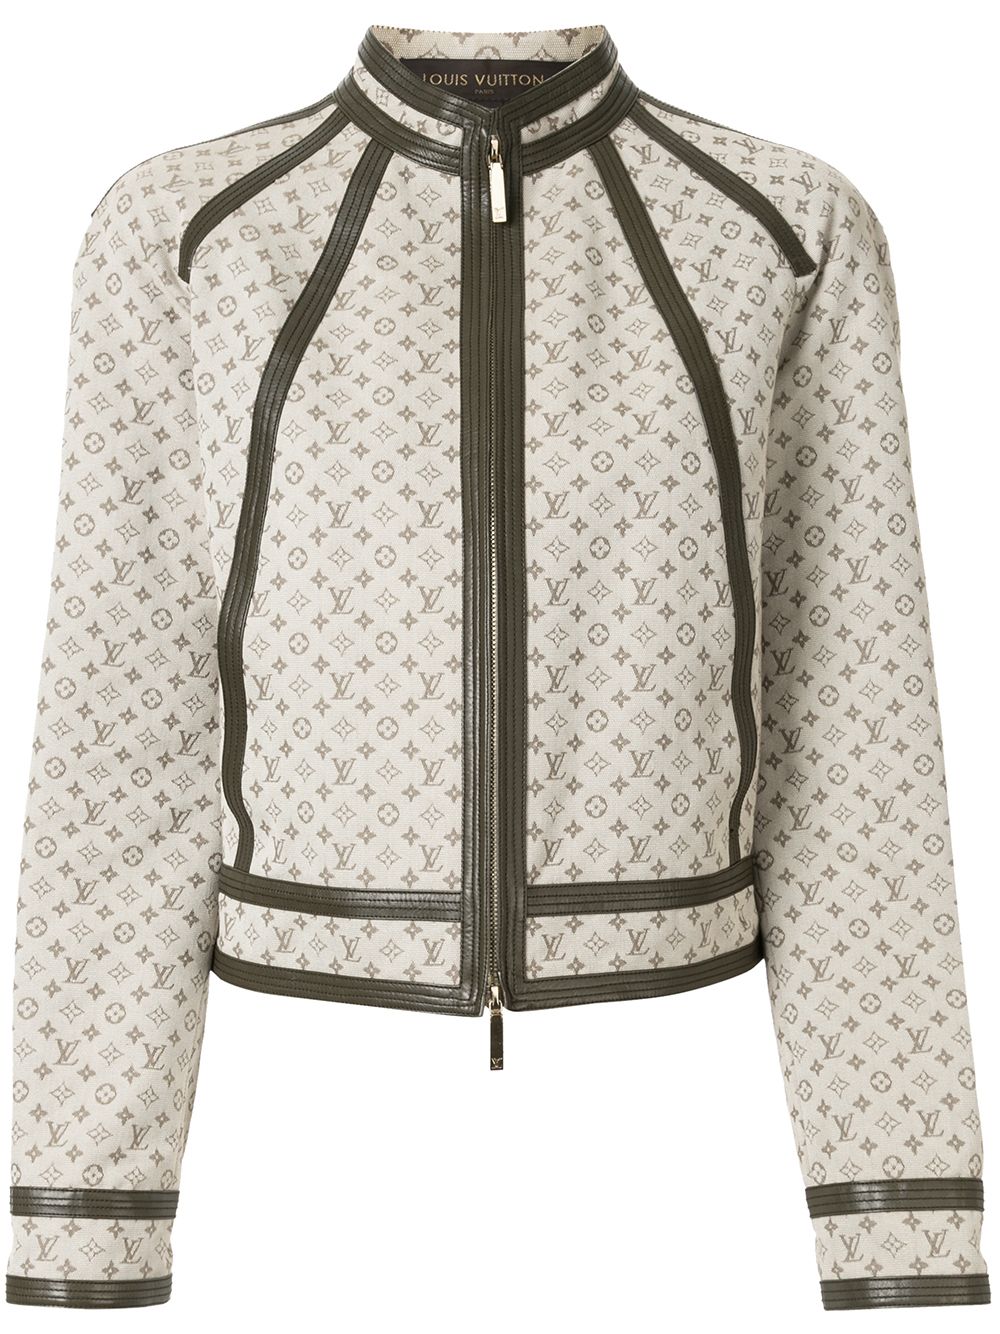 Louis Vuitton Pre-Owned Jackets for Women - Shop on FARFETCH